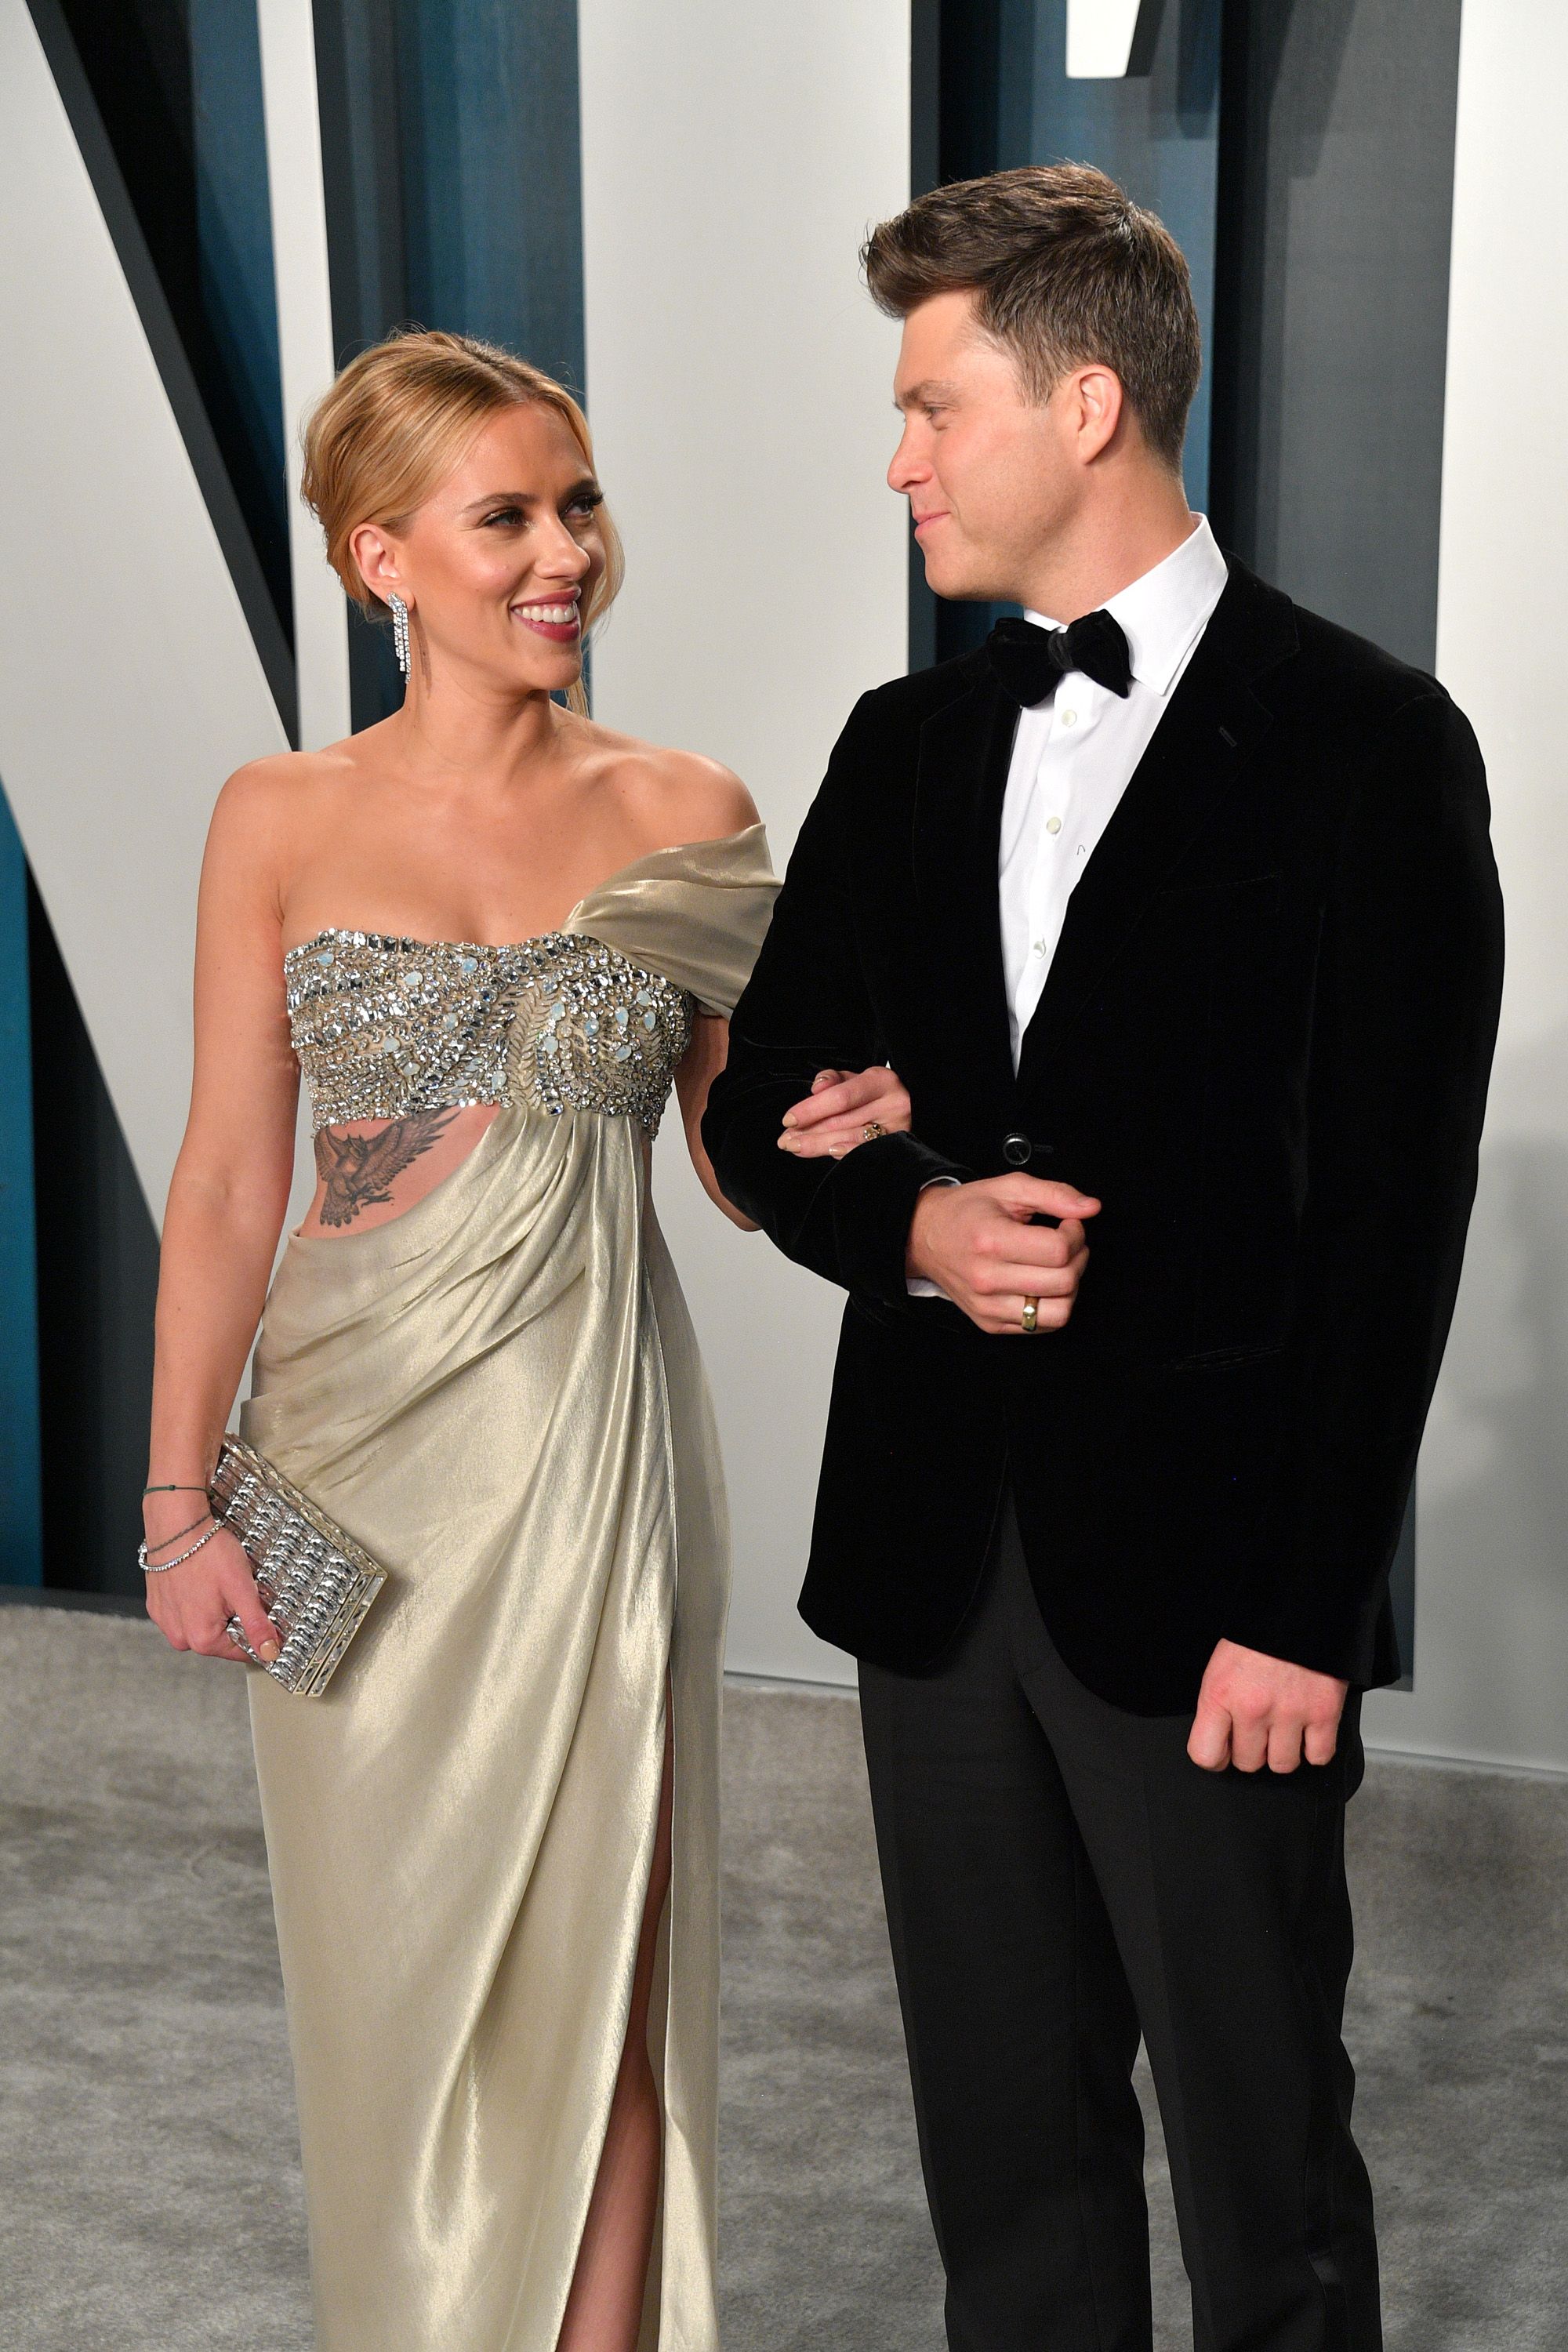 who is colin jost married to , who is mariah carey married to